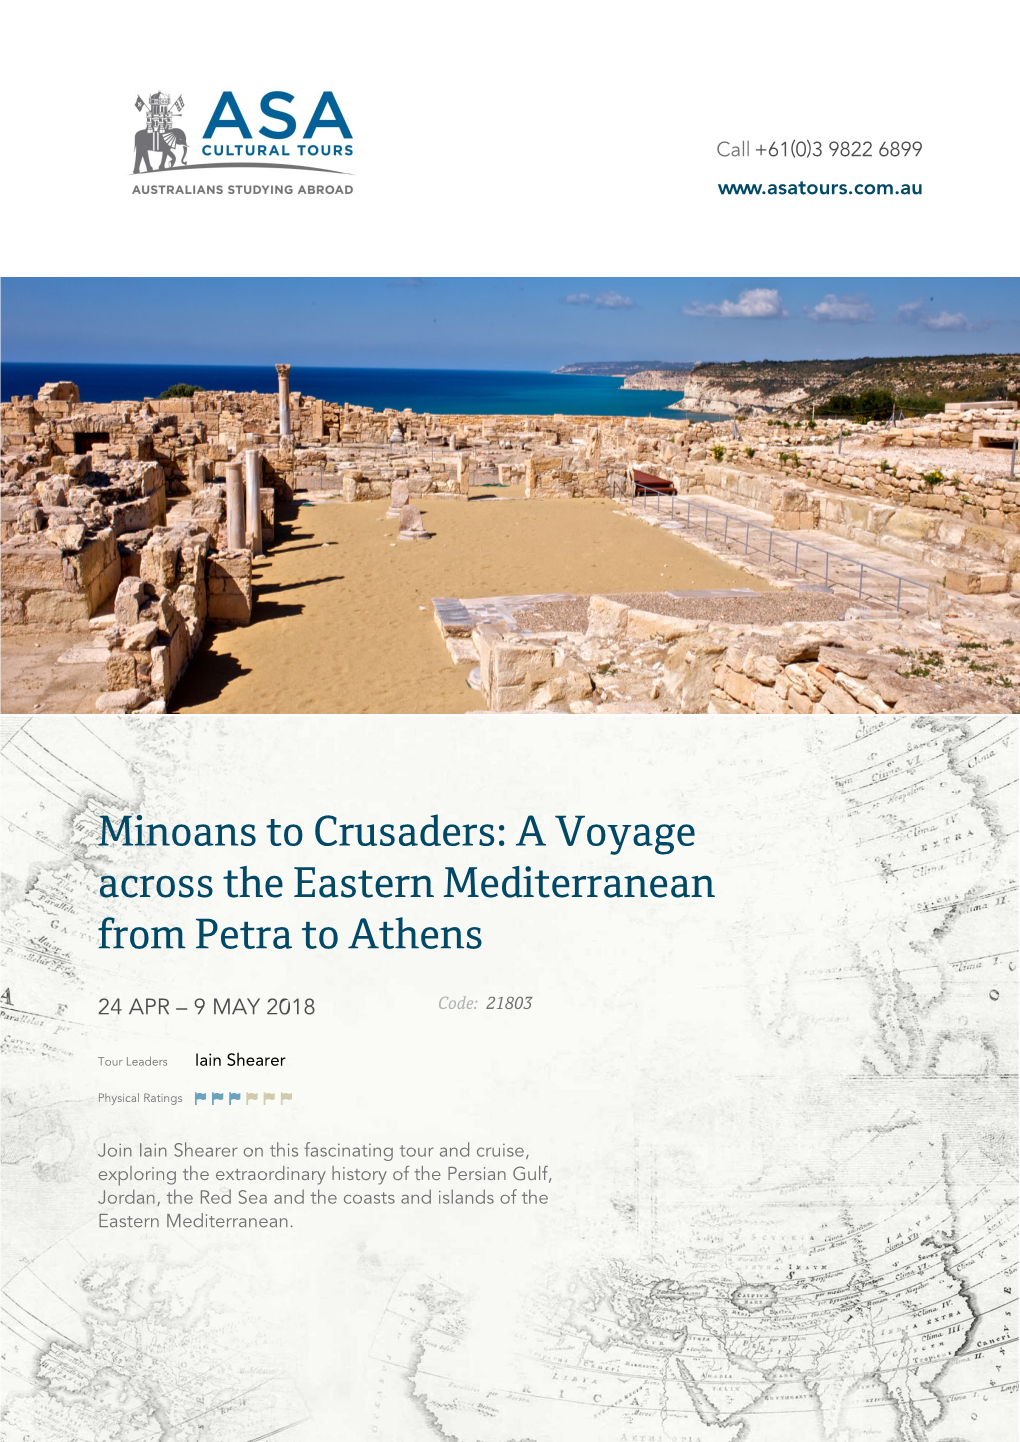 Minoans to Crusaders: a Voyage Across the Eastern Mediterranean from Petra to Athens